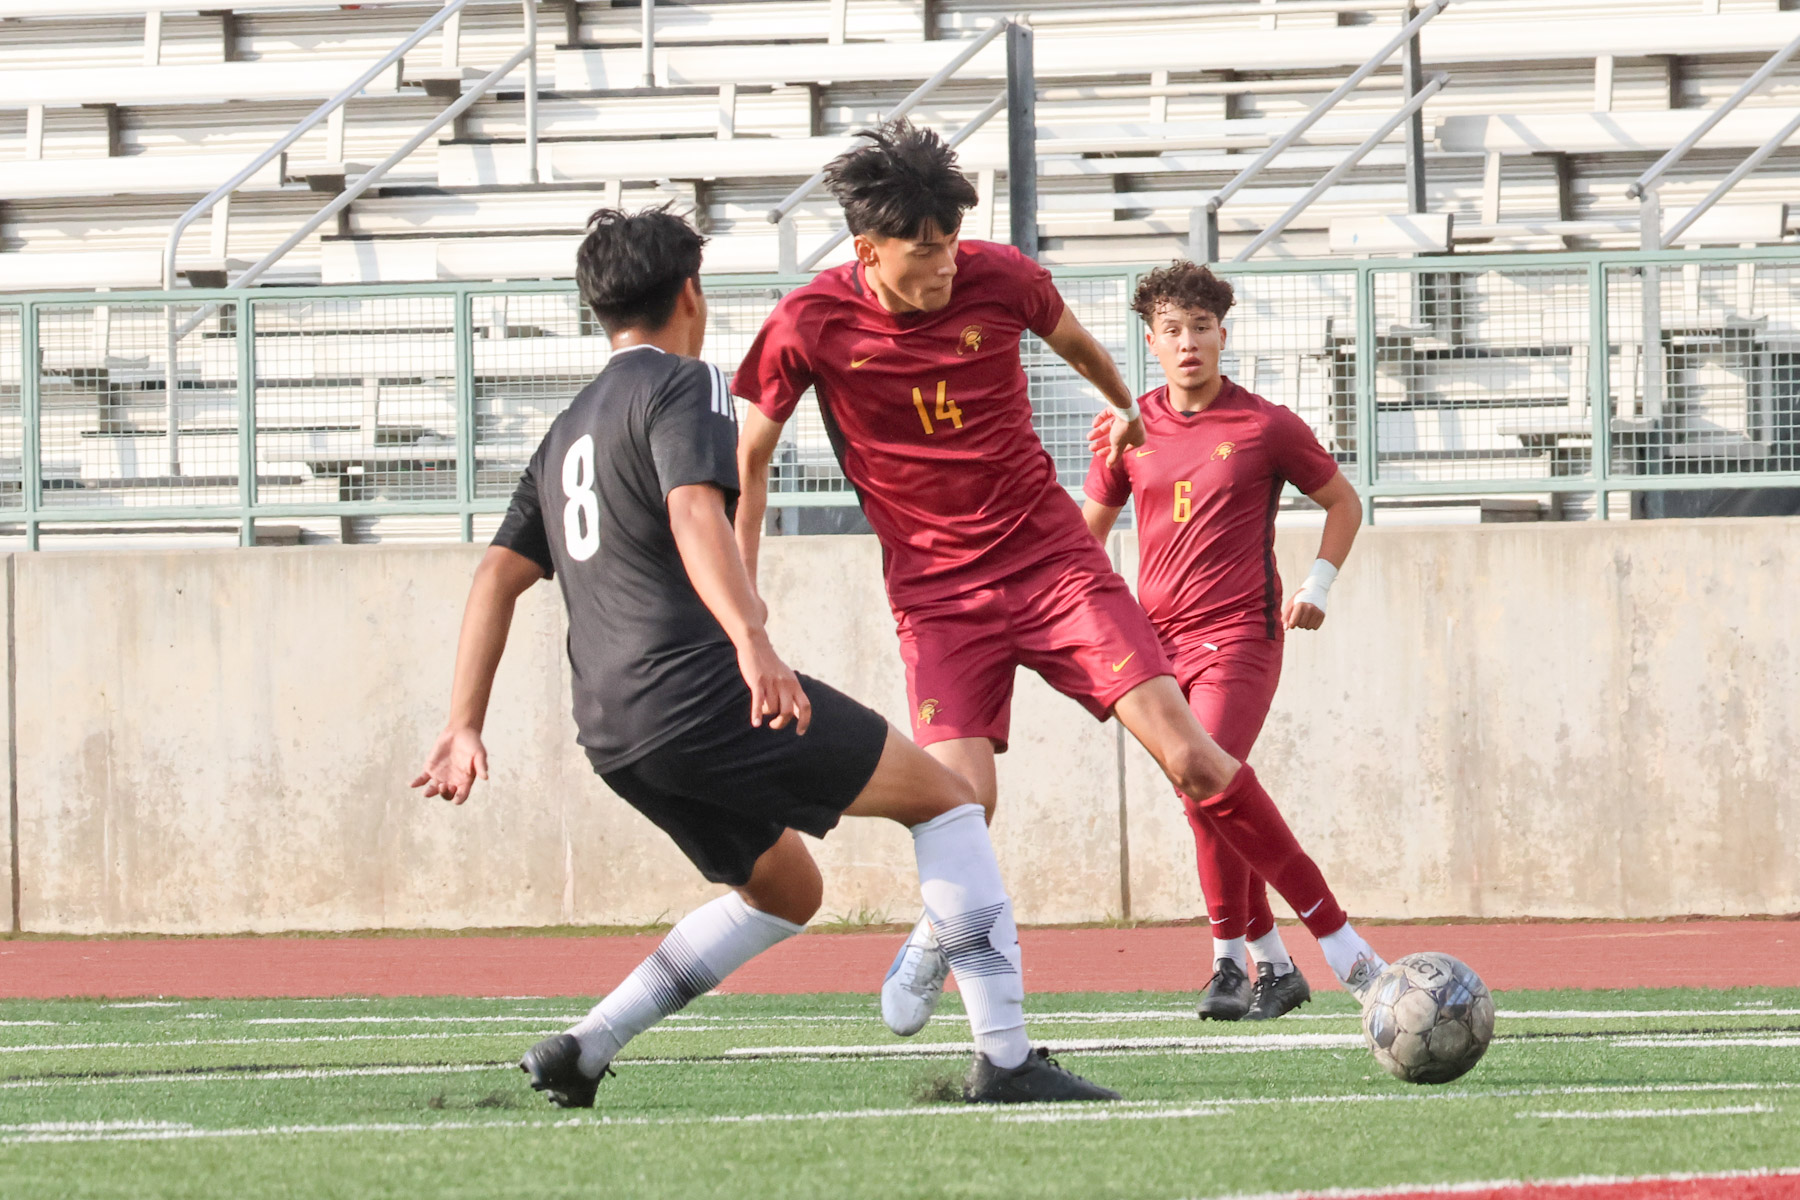 Angel Ballesteros plays the ball during PCC's season finale (photo by Richard Quinton).